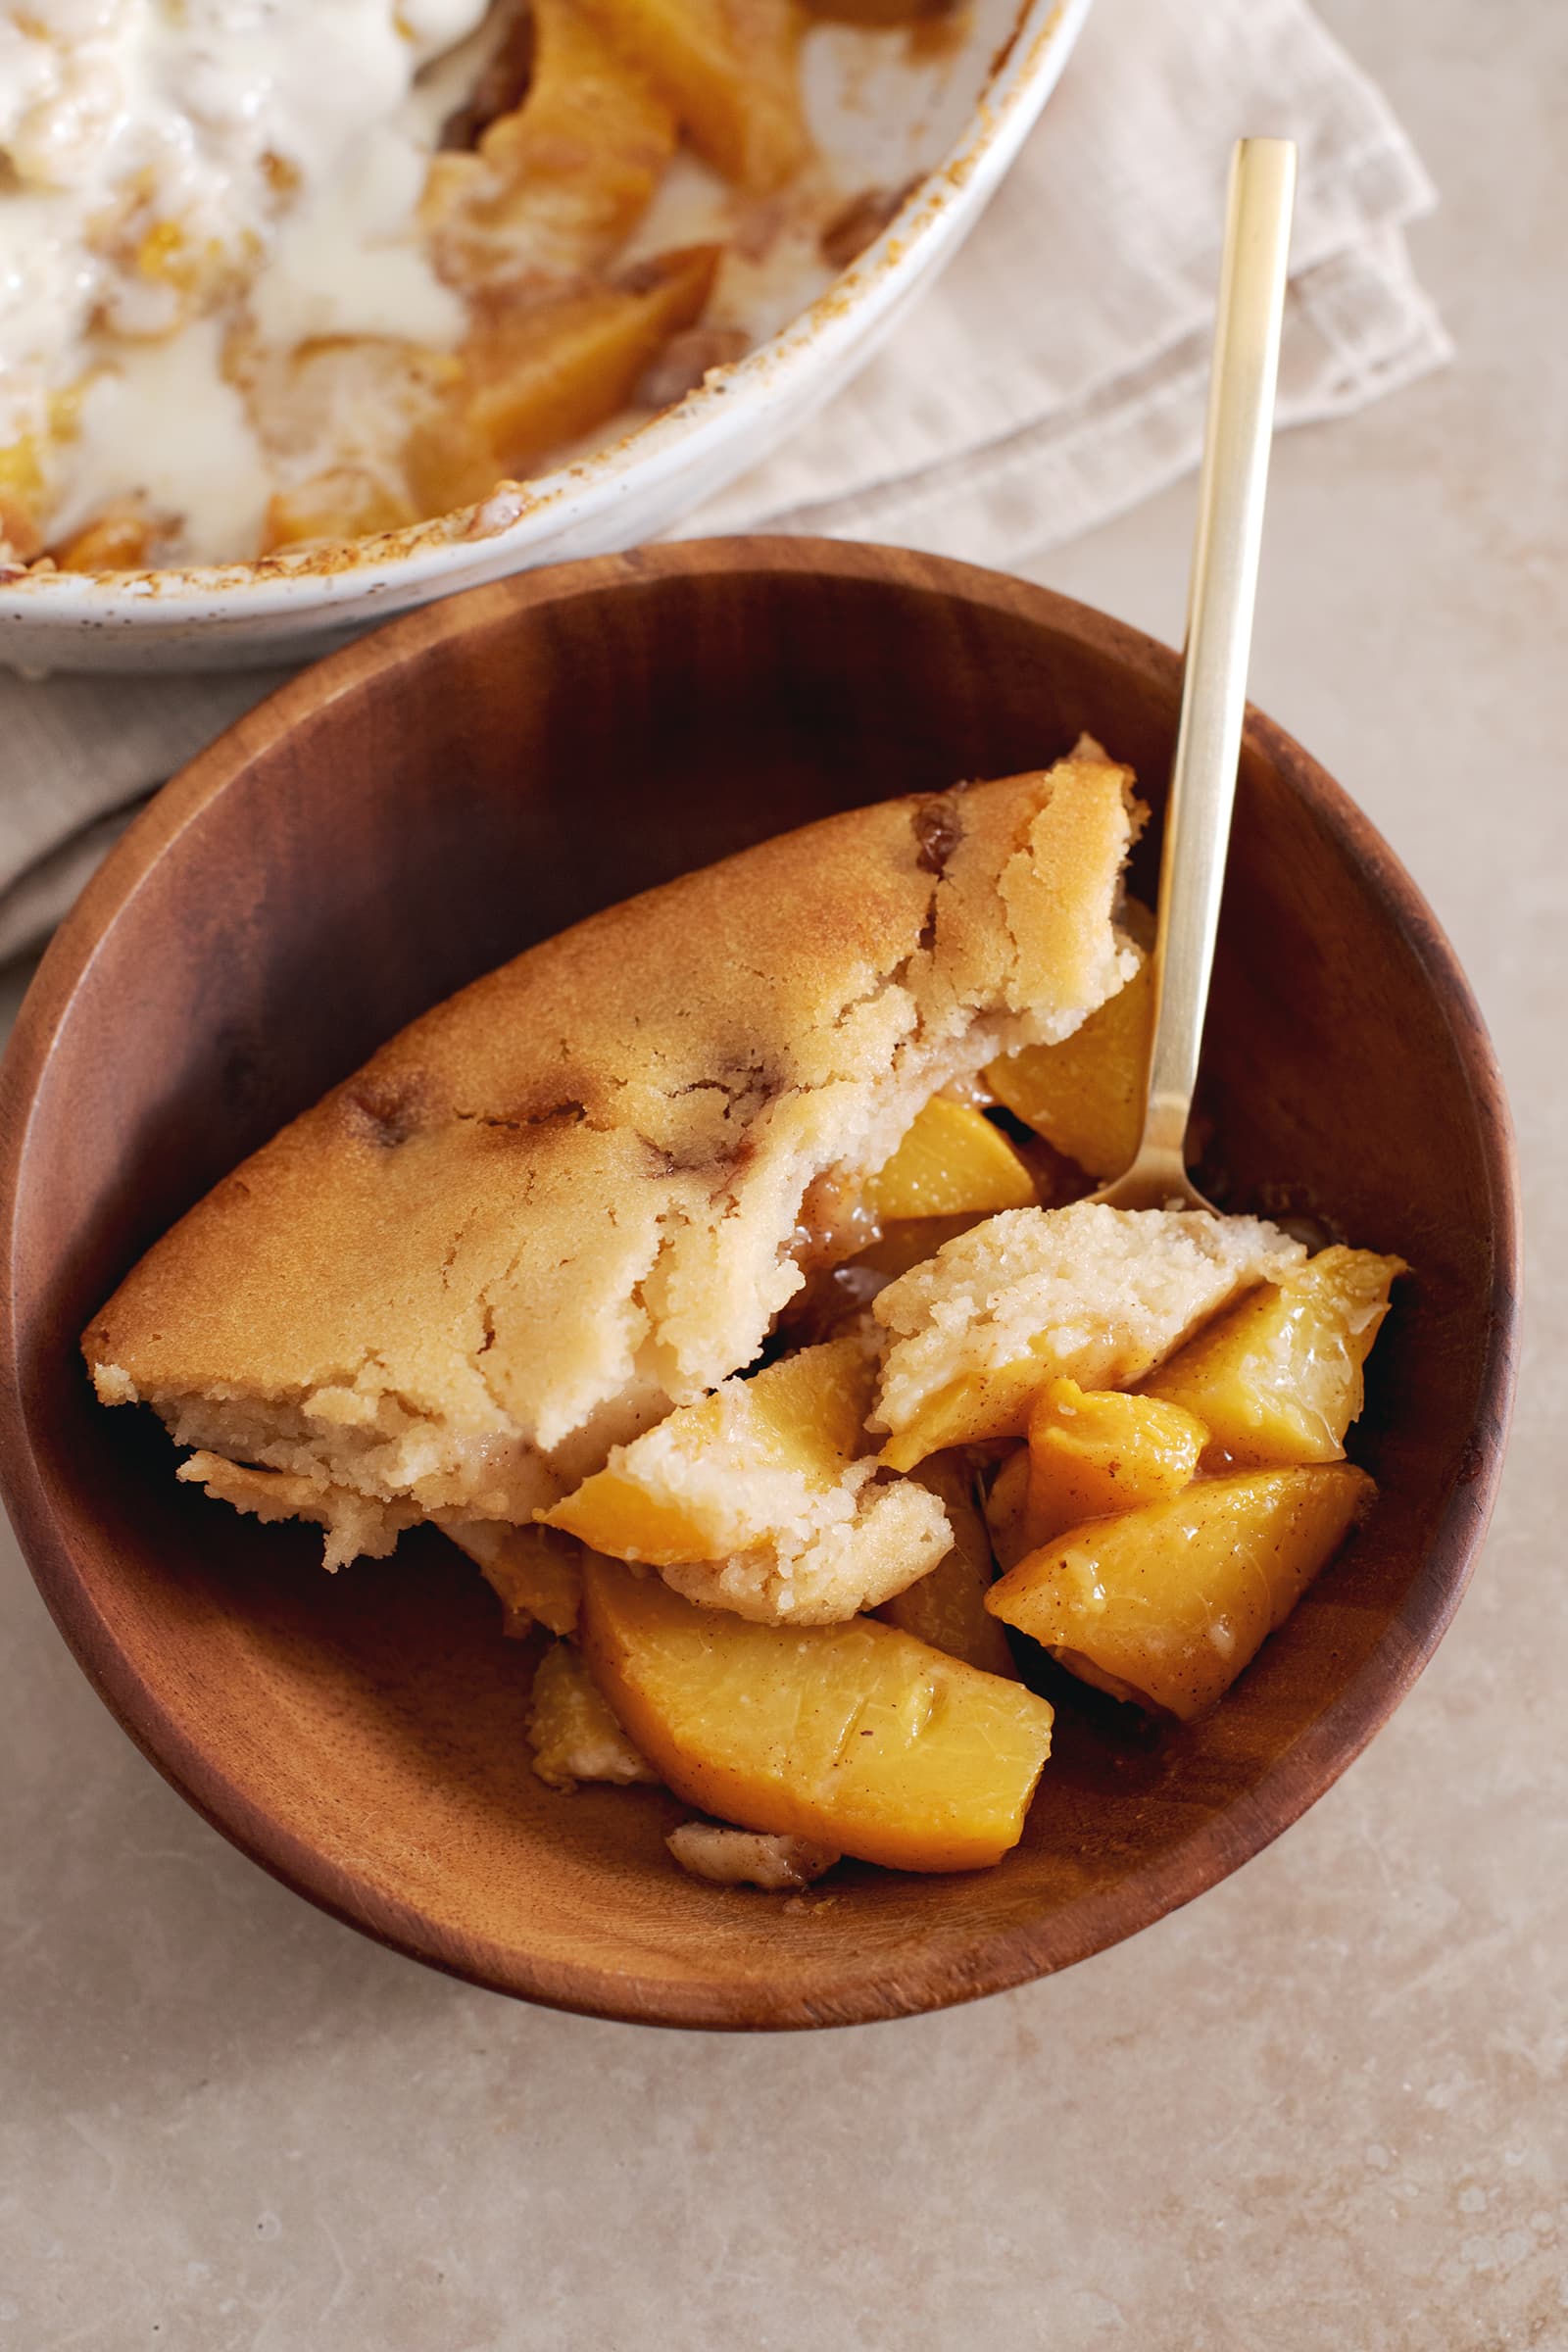 A slice of peach cobbler in a wooden bowl with a spoon.